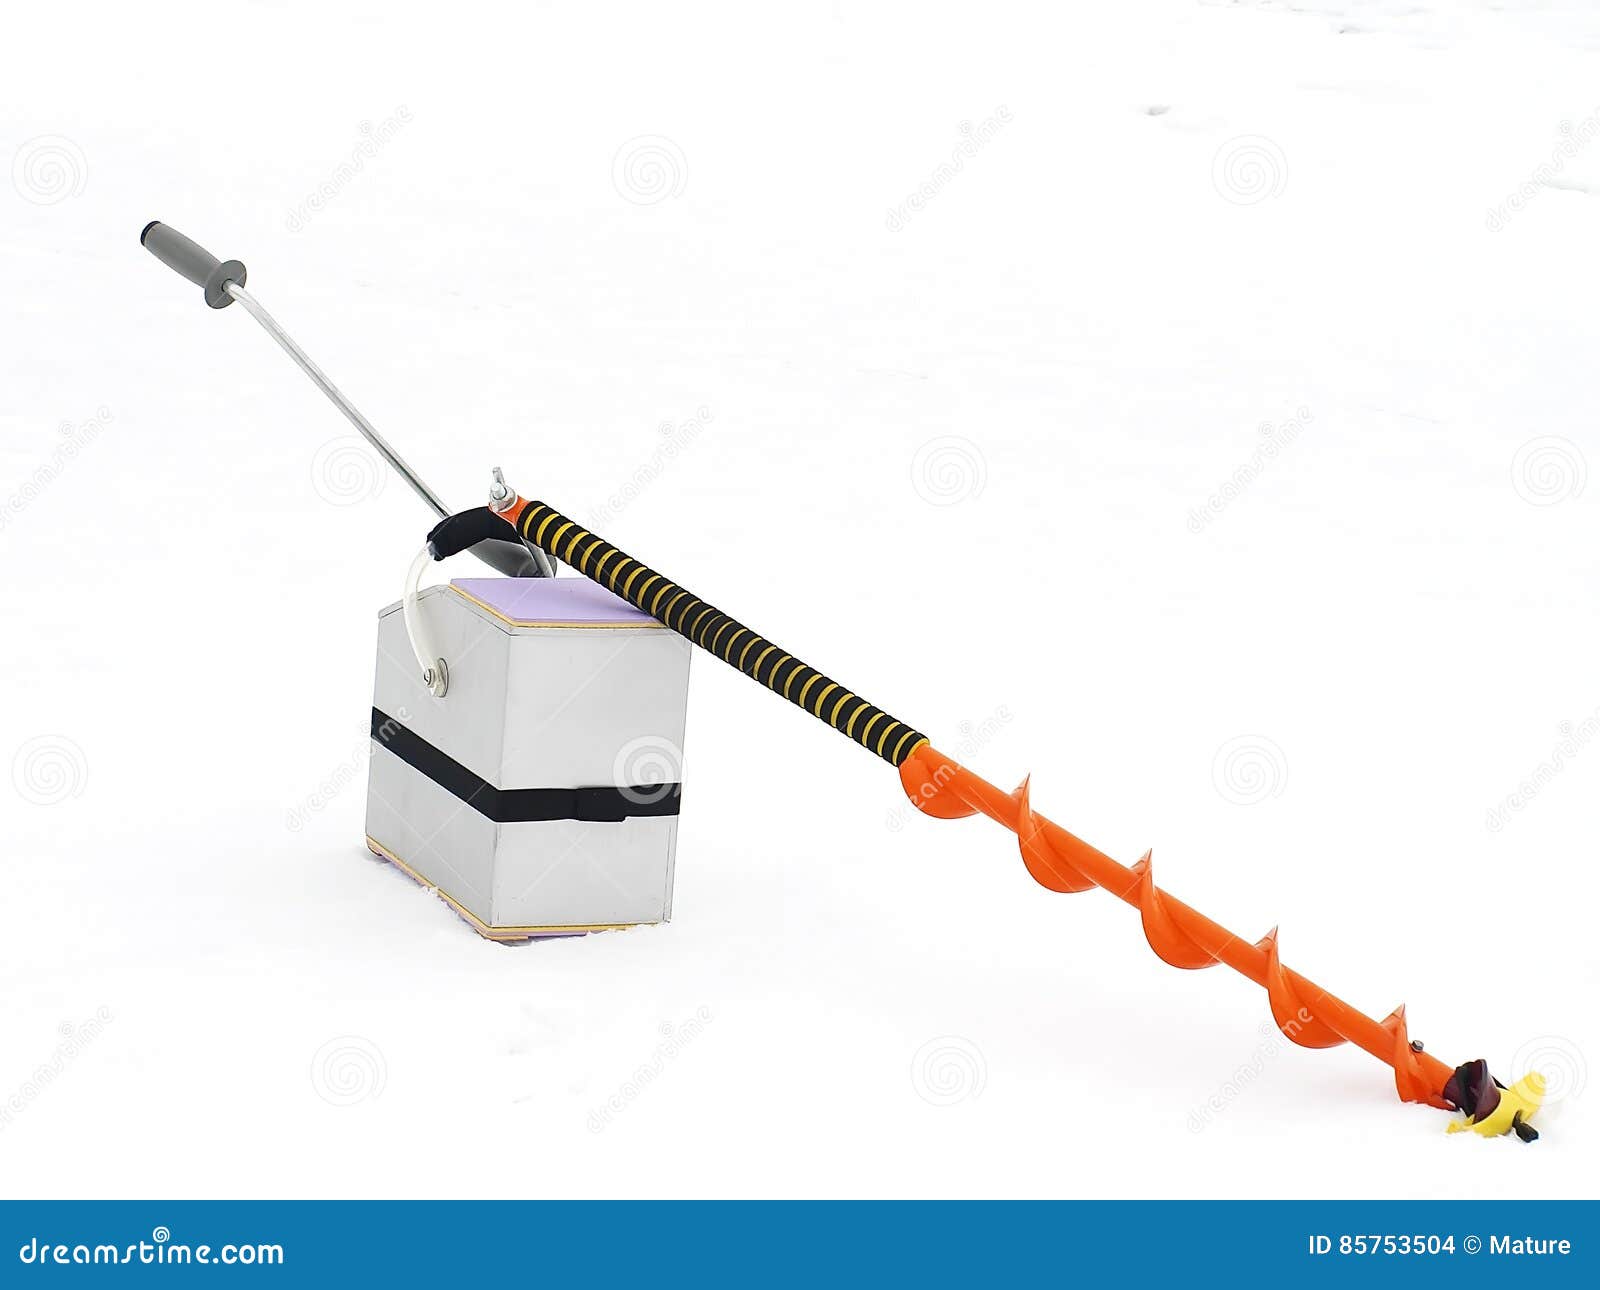 Small Hand Operated Ice Auger Used in Ice Fishing Stock Photo